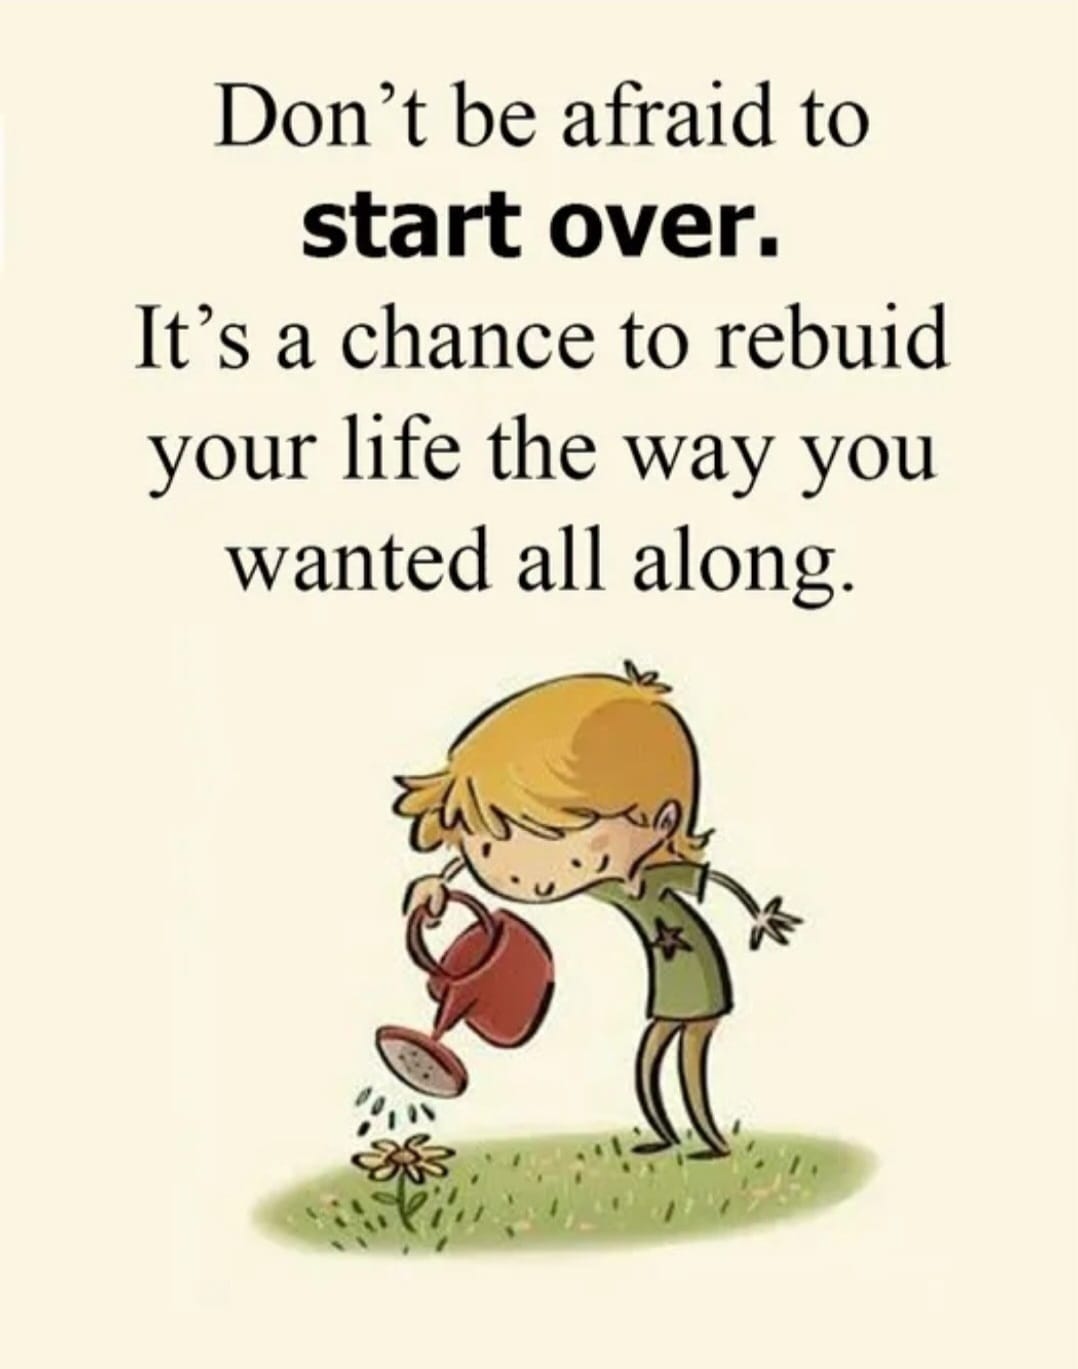 Don't be afraid to start over, It's a chance to rebuid your life the way you wanted all along